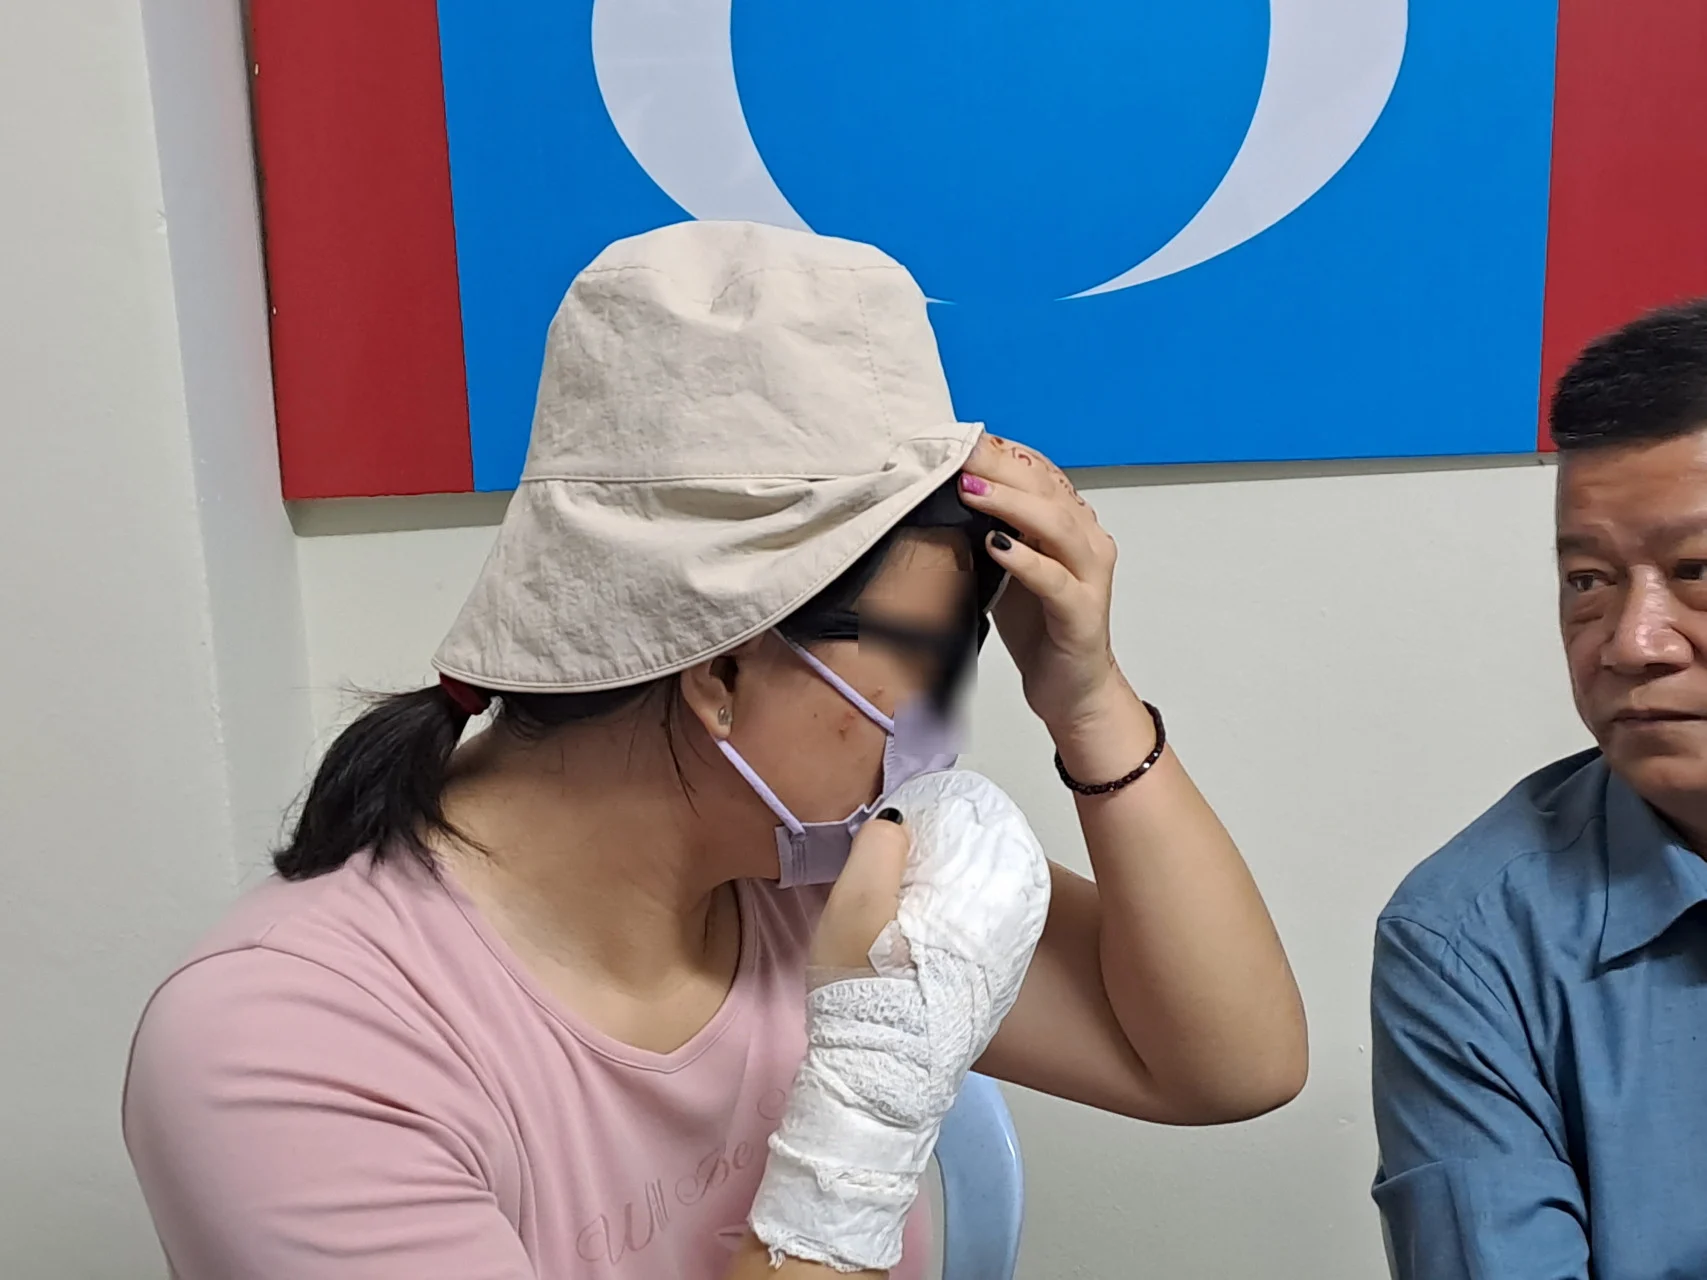 China student yuan shows her injuries to reporters